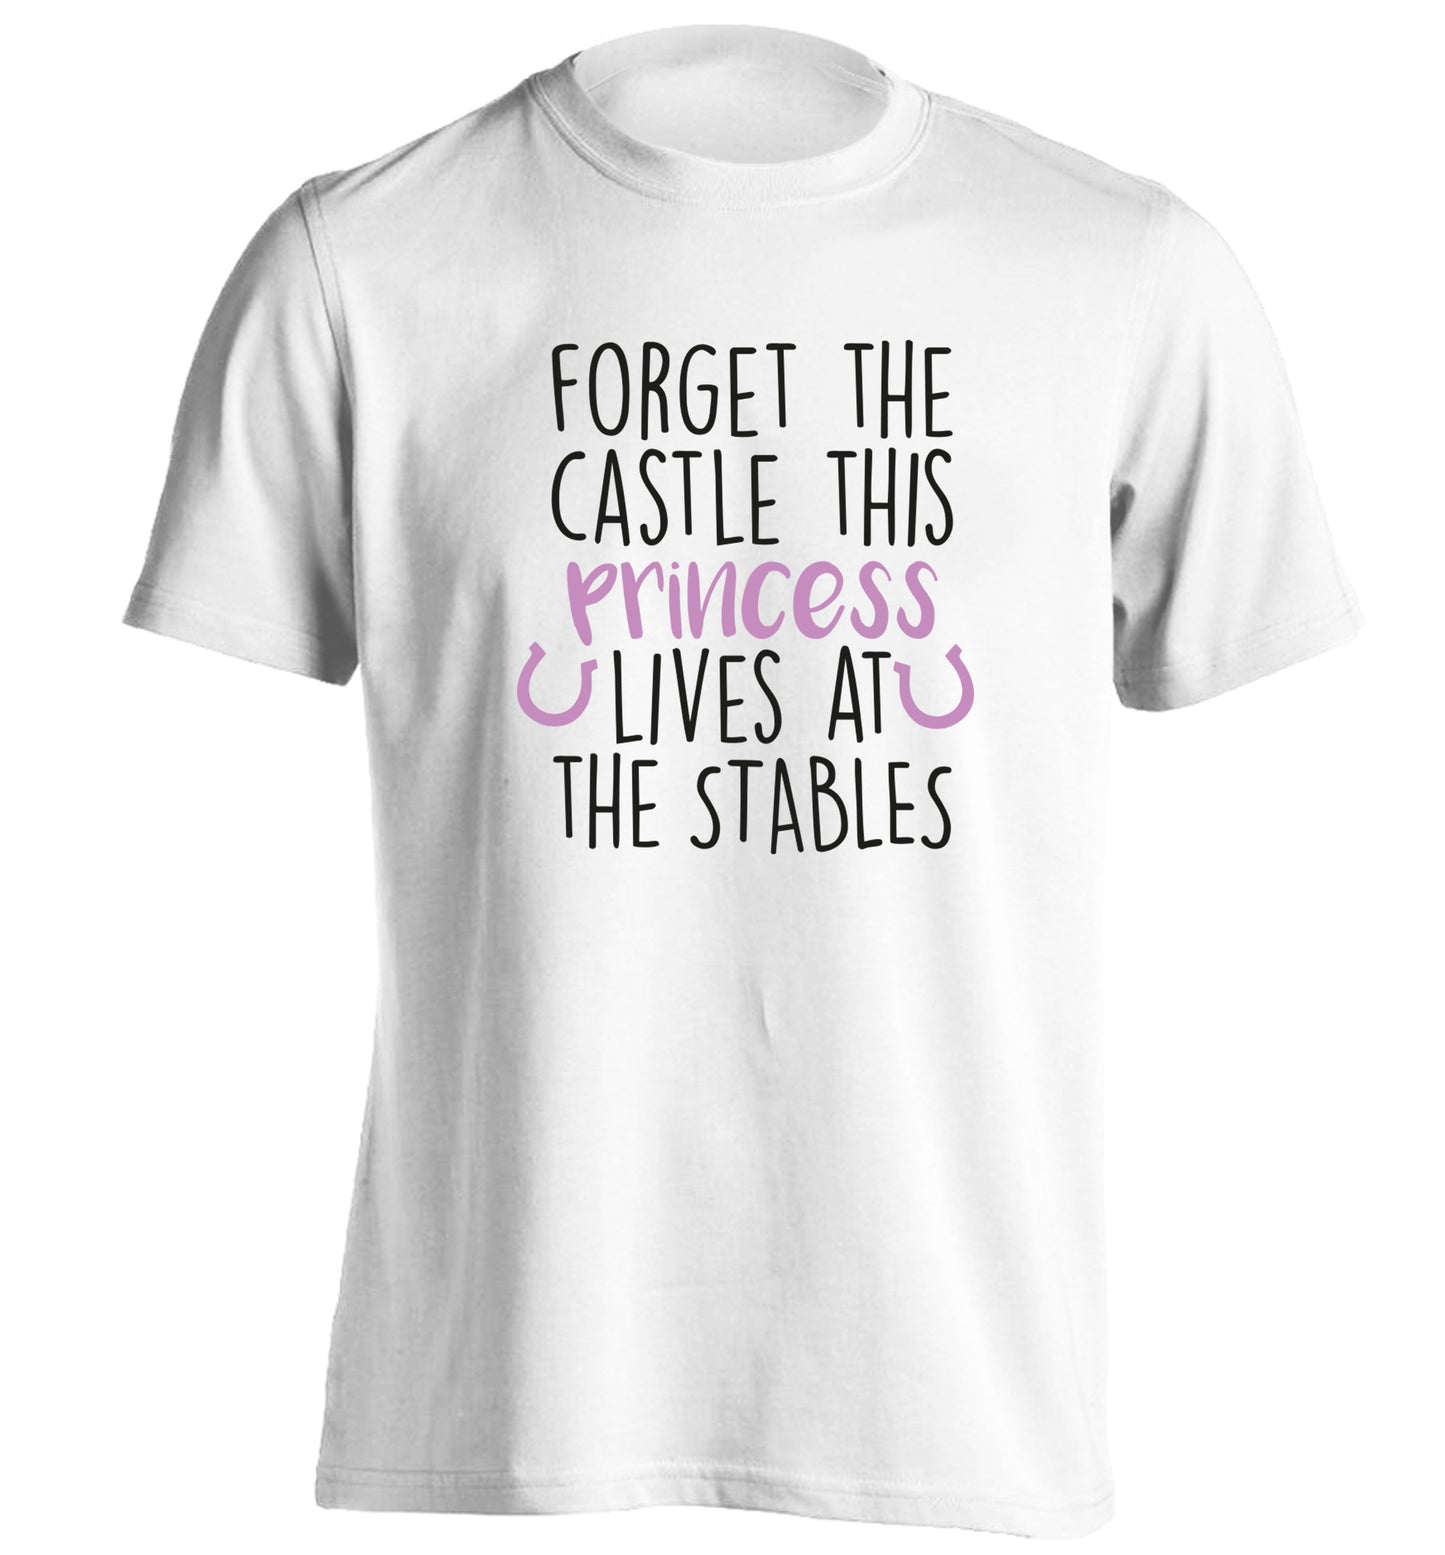 Forget the castle this princess lives at the stables adults unisex white Tshirt 2XL